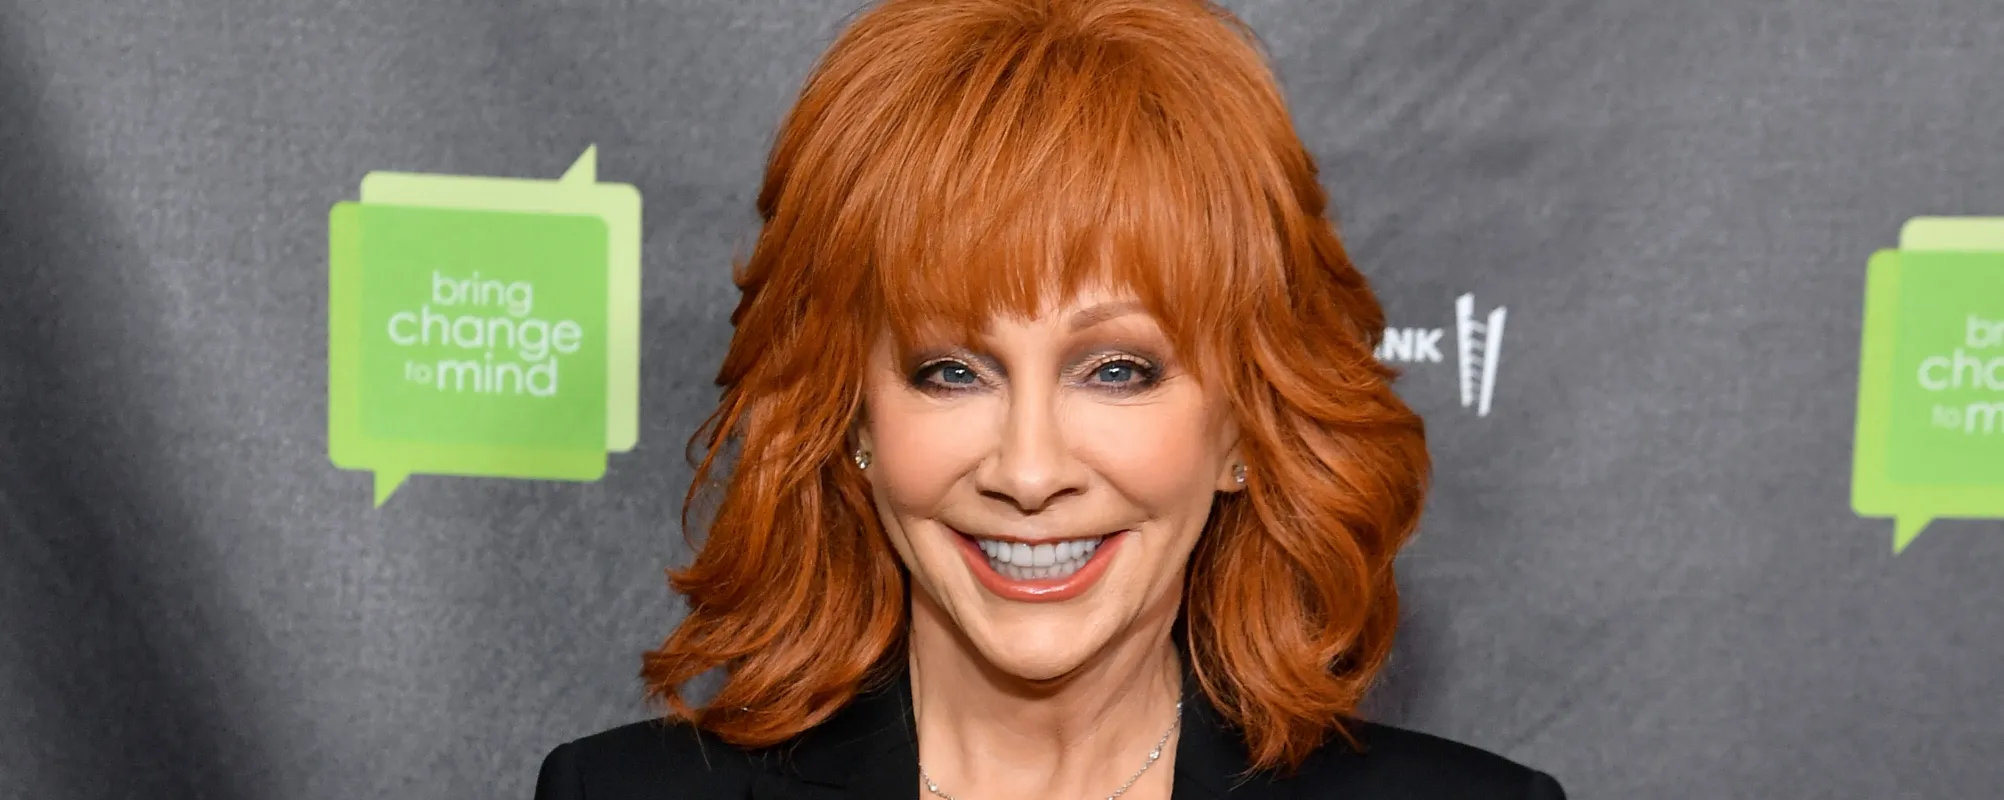 ‘The Voice’ Season 24: A Look at the 3 Remaining Singers on Team Reba